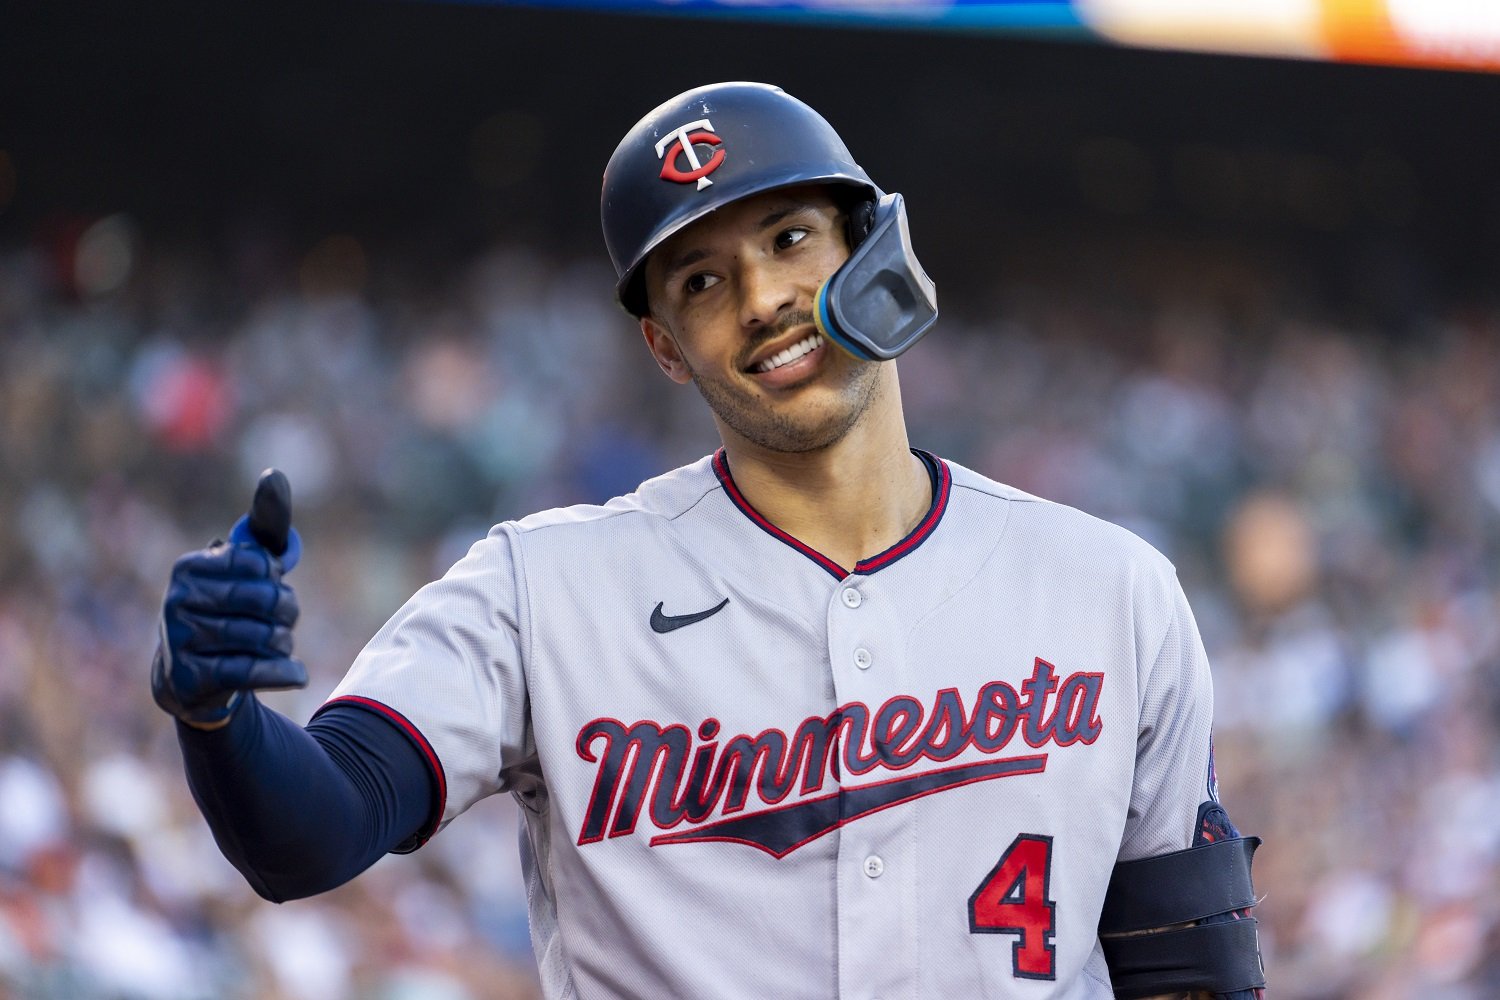 MLB Hot Stove Rumors and Updates: Twins sign Carlos Correa - Over